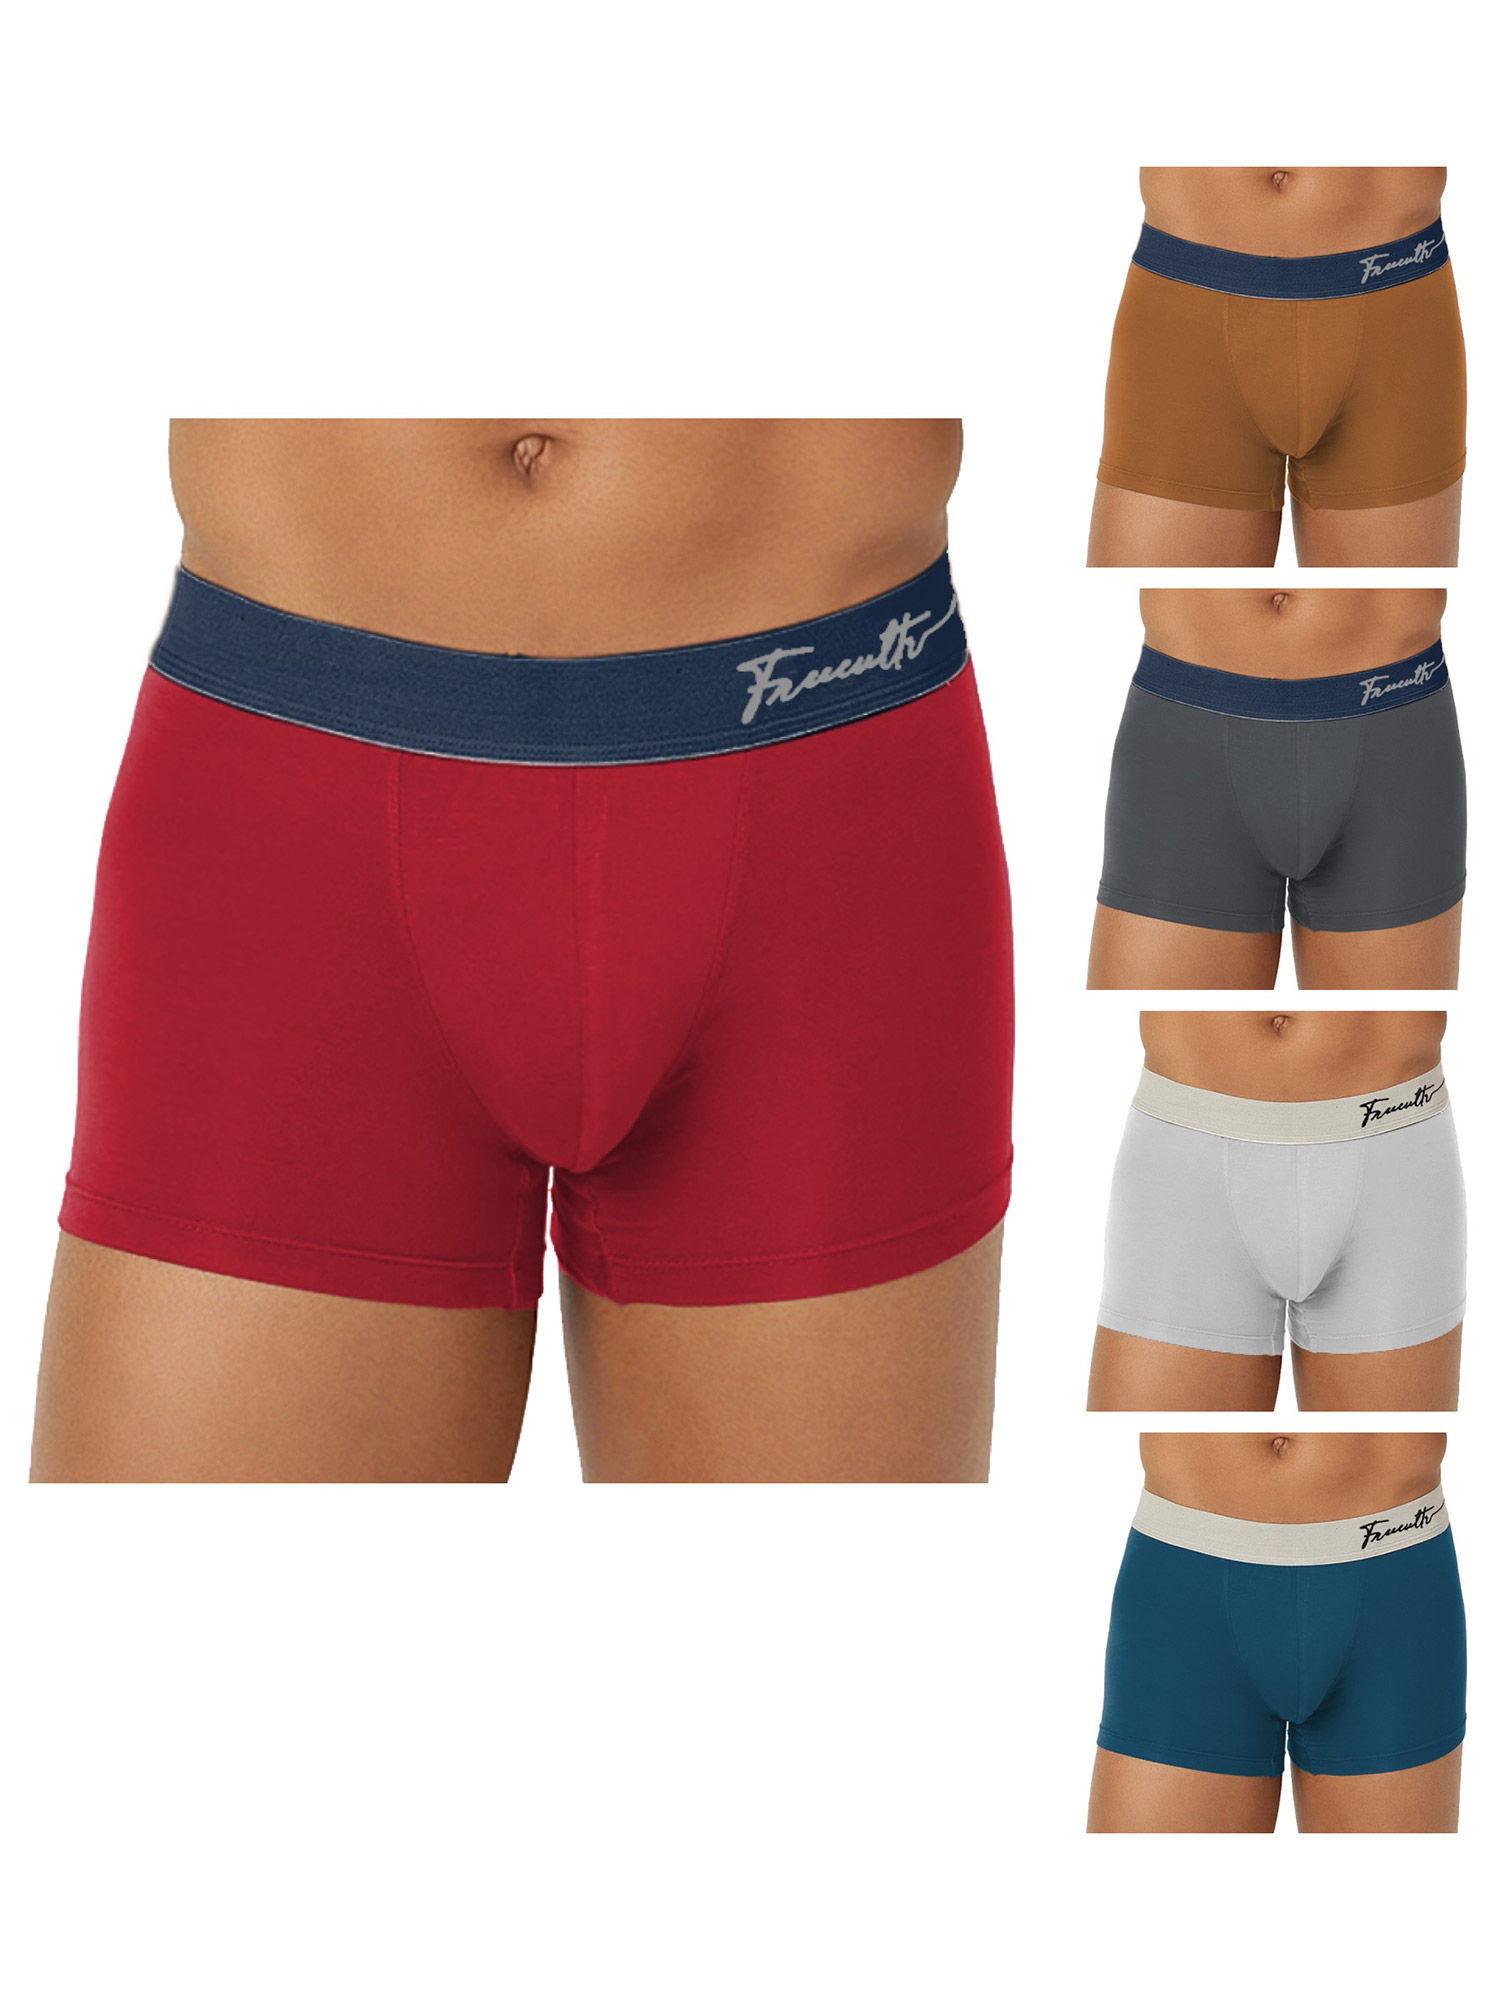 mens underwear anti chaffing sweat-proof micromodal trunks (pack of 5)